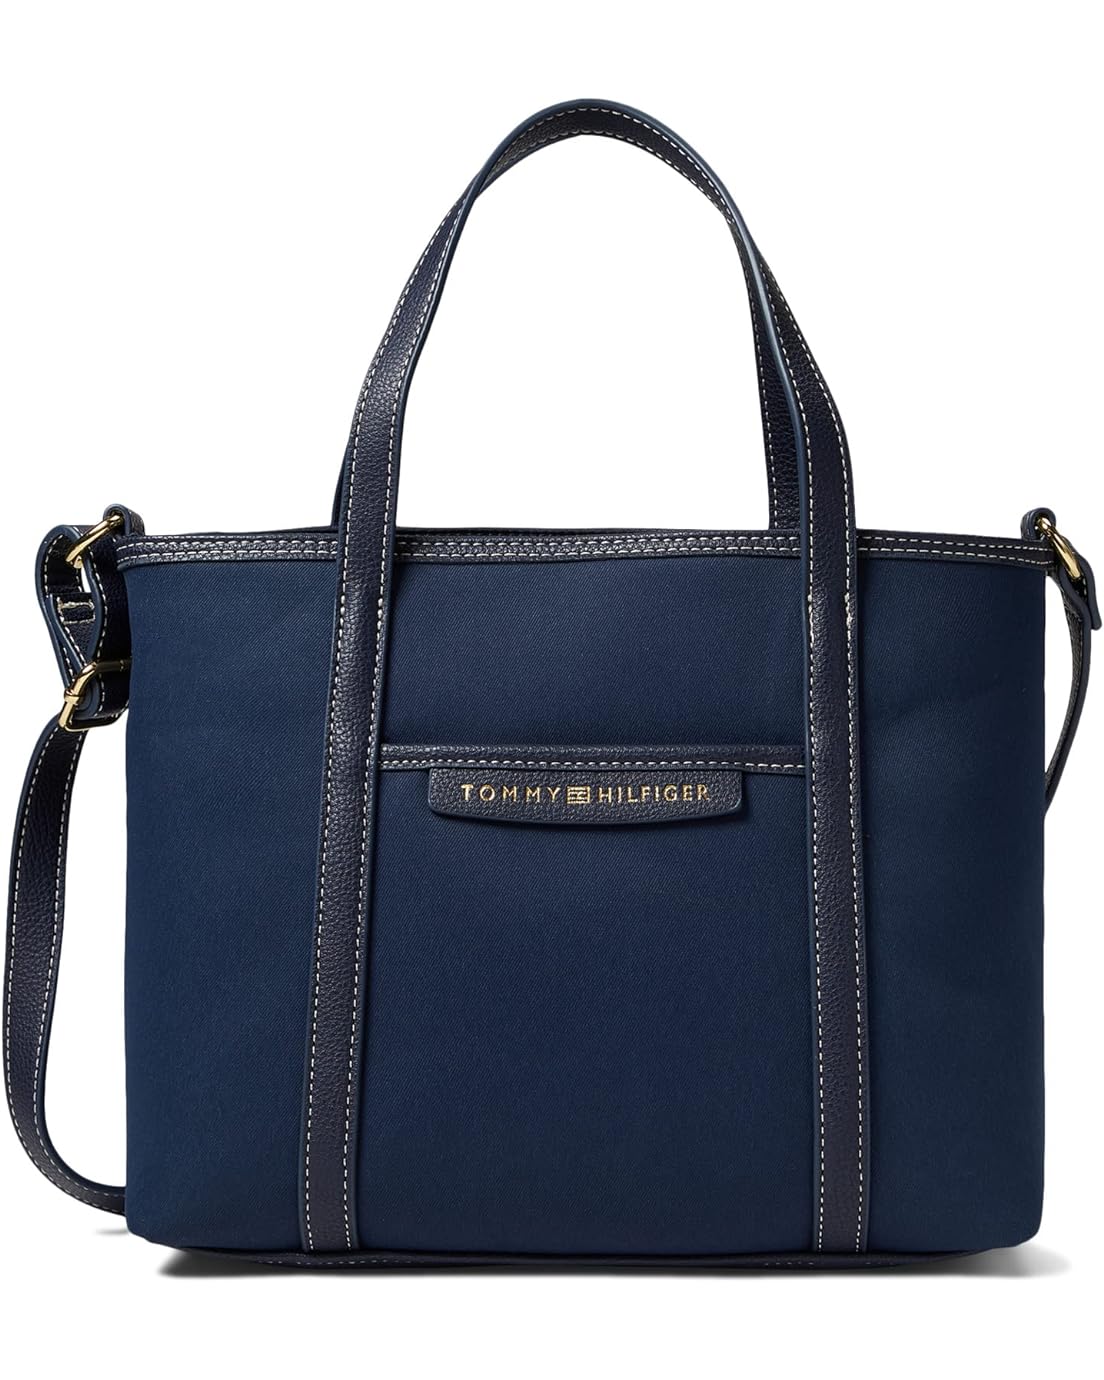 Tommy Hilfiger Kennedy II Convertible Shopper-Brushed Twill